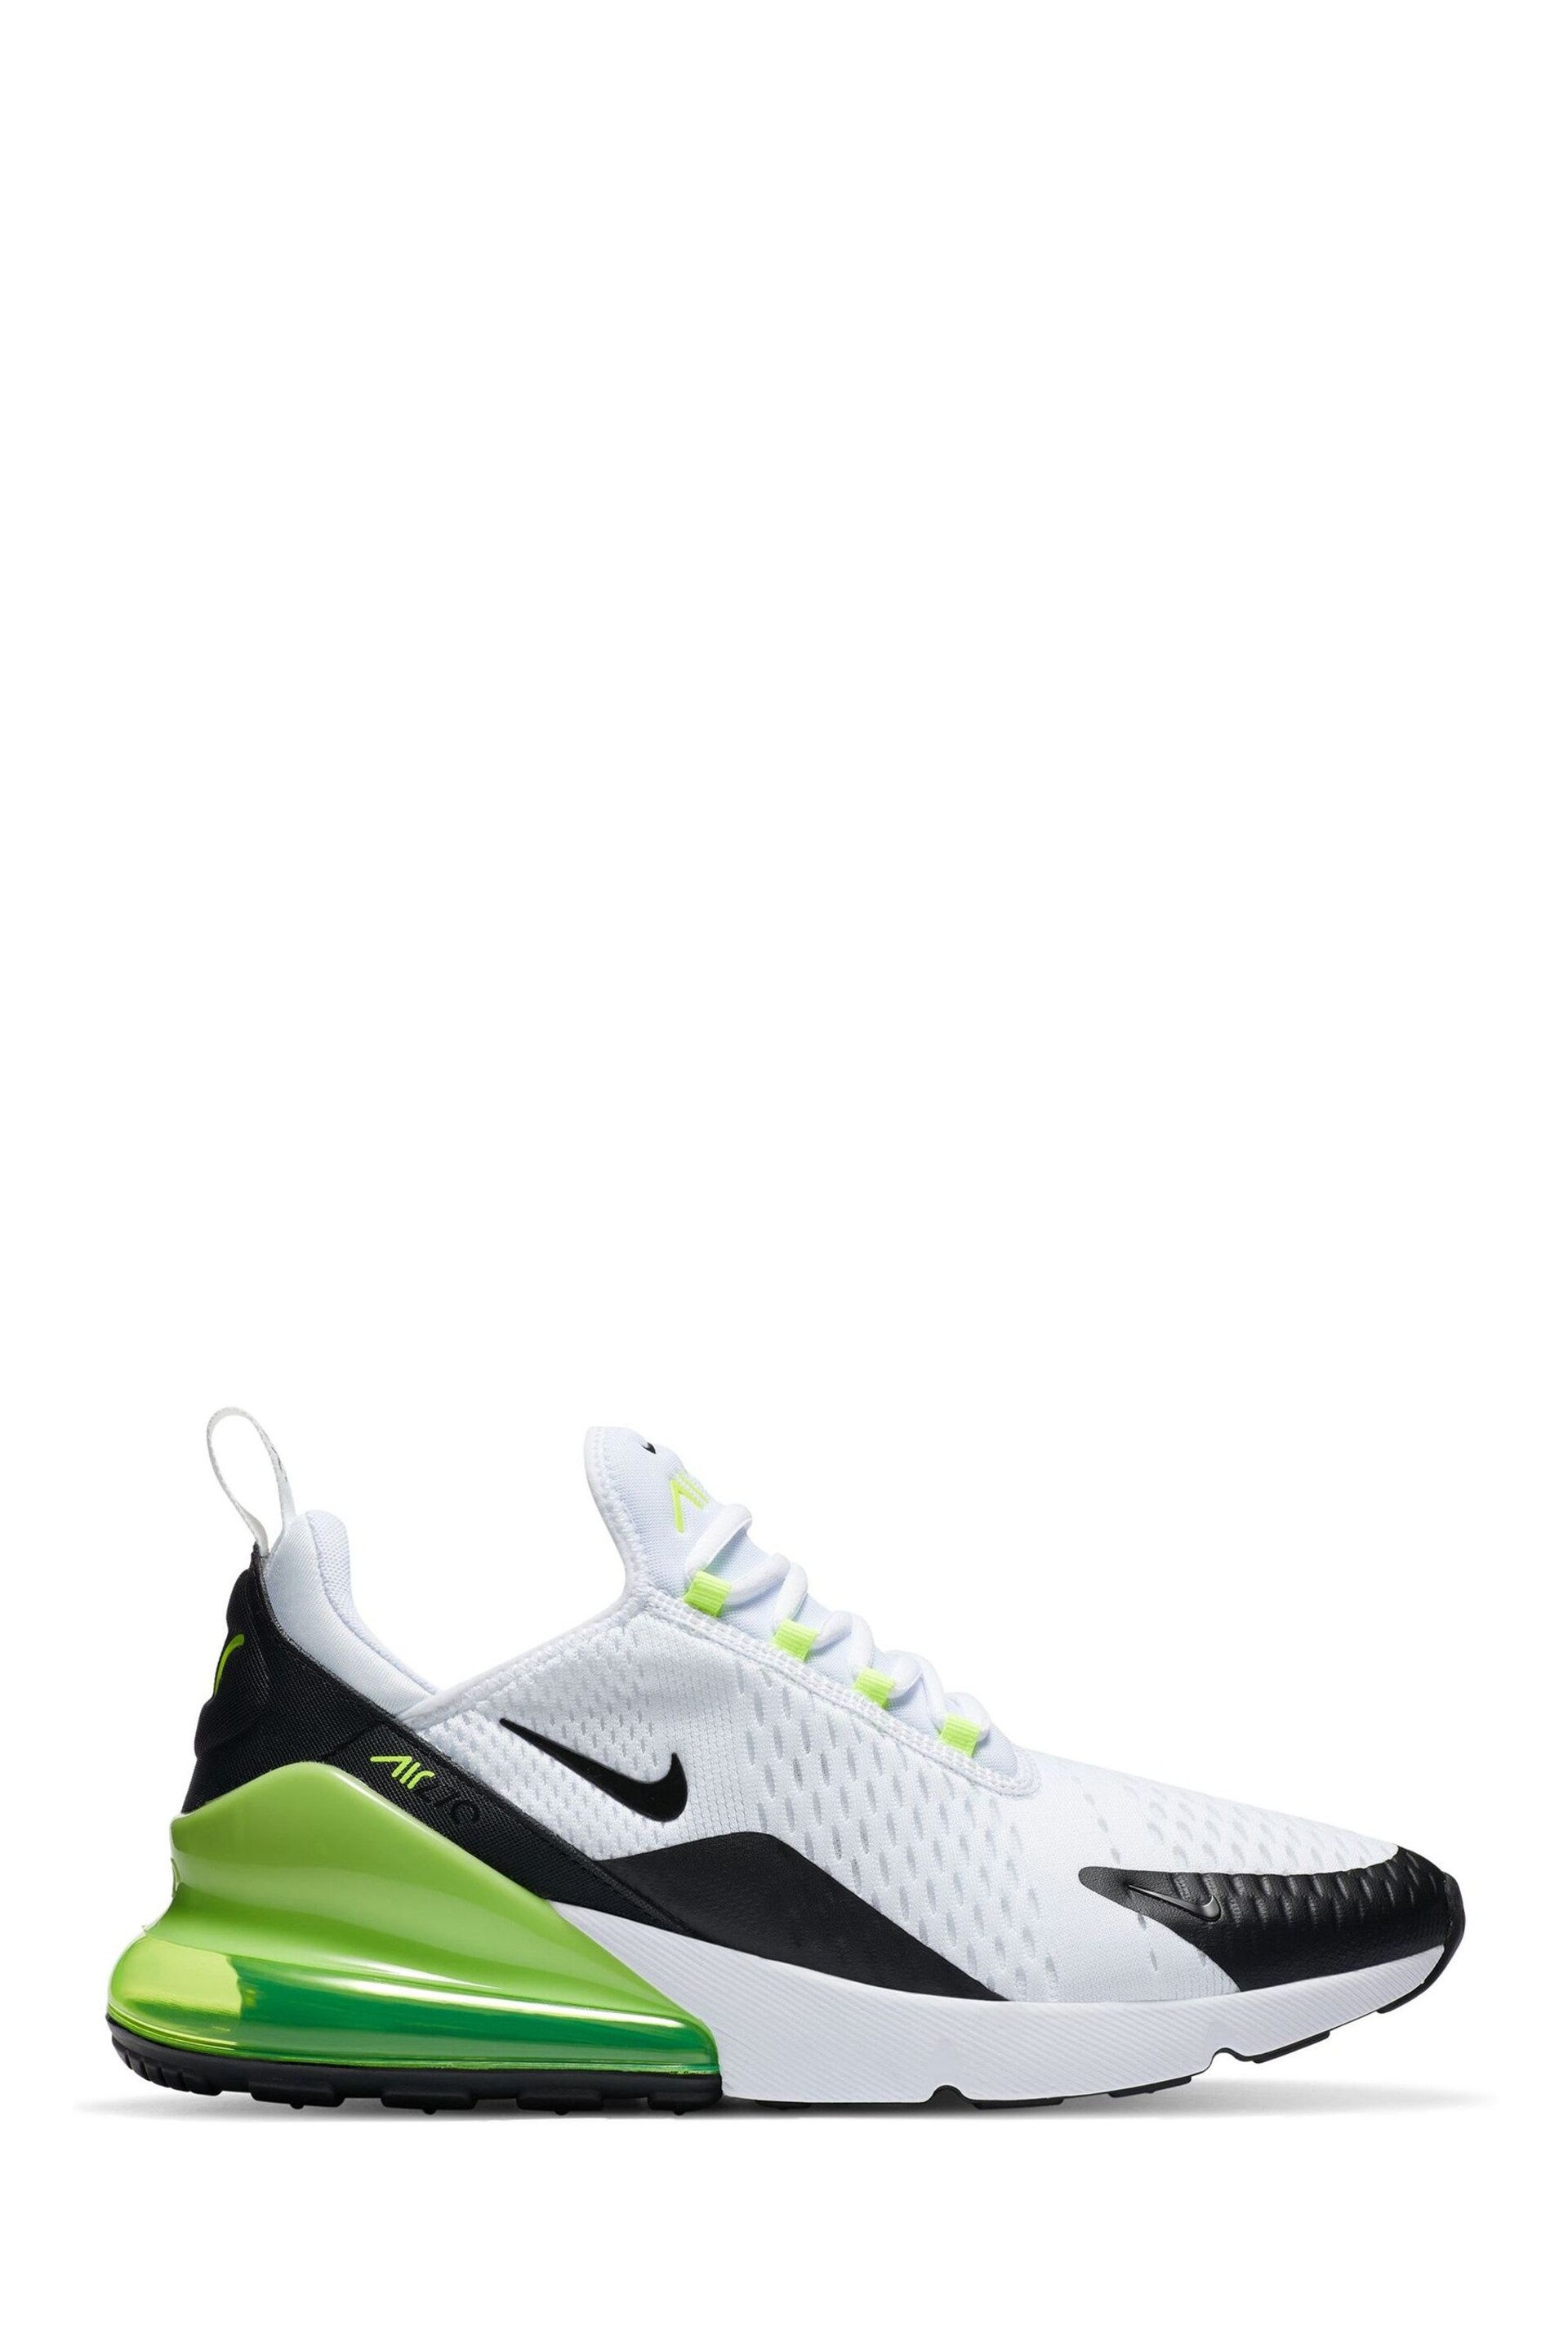 Nike Green/White Air Max 270 Trainers - Image 1 of 10